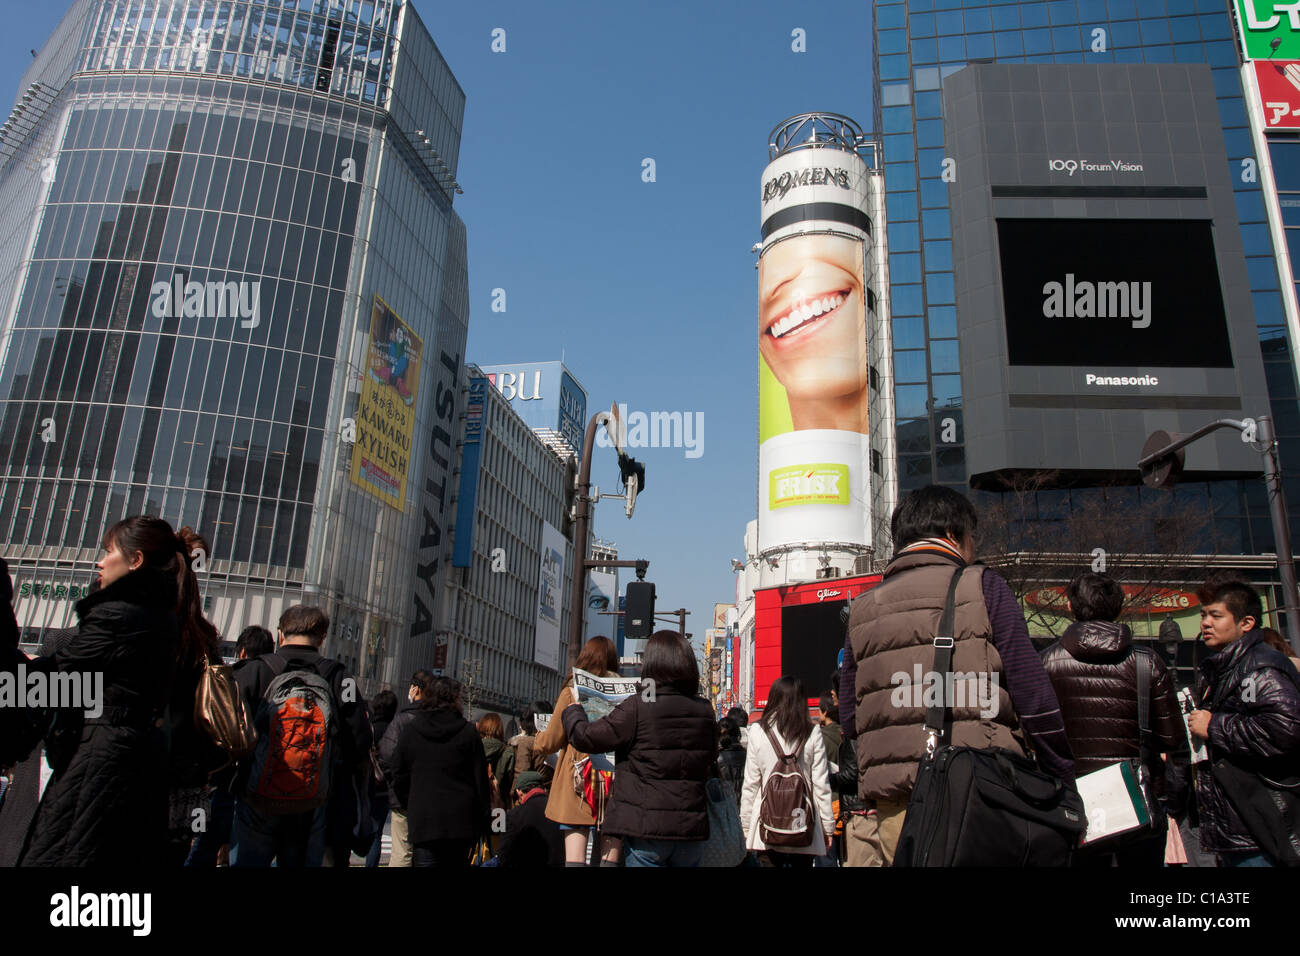 Video screens at Shibuya Crossing are turned off to save electricity due to shortages caused by the March 11th 2011 earthquake. Tokyo, Japan Stock Photo